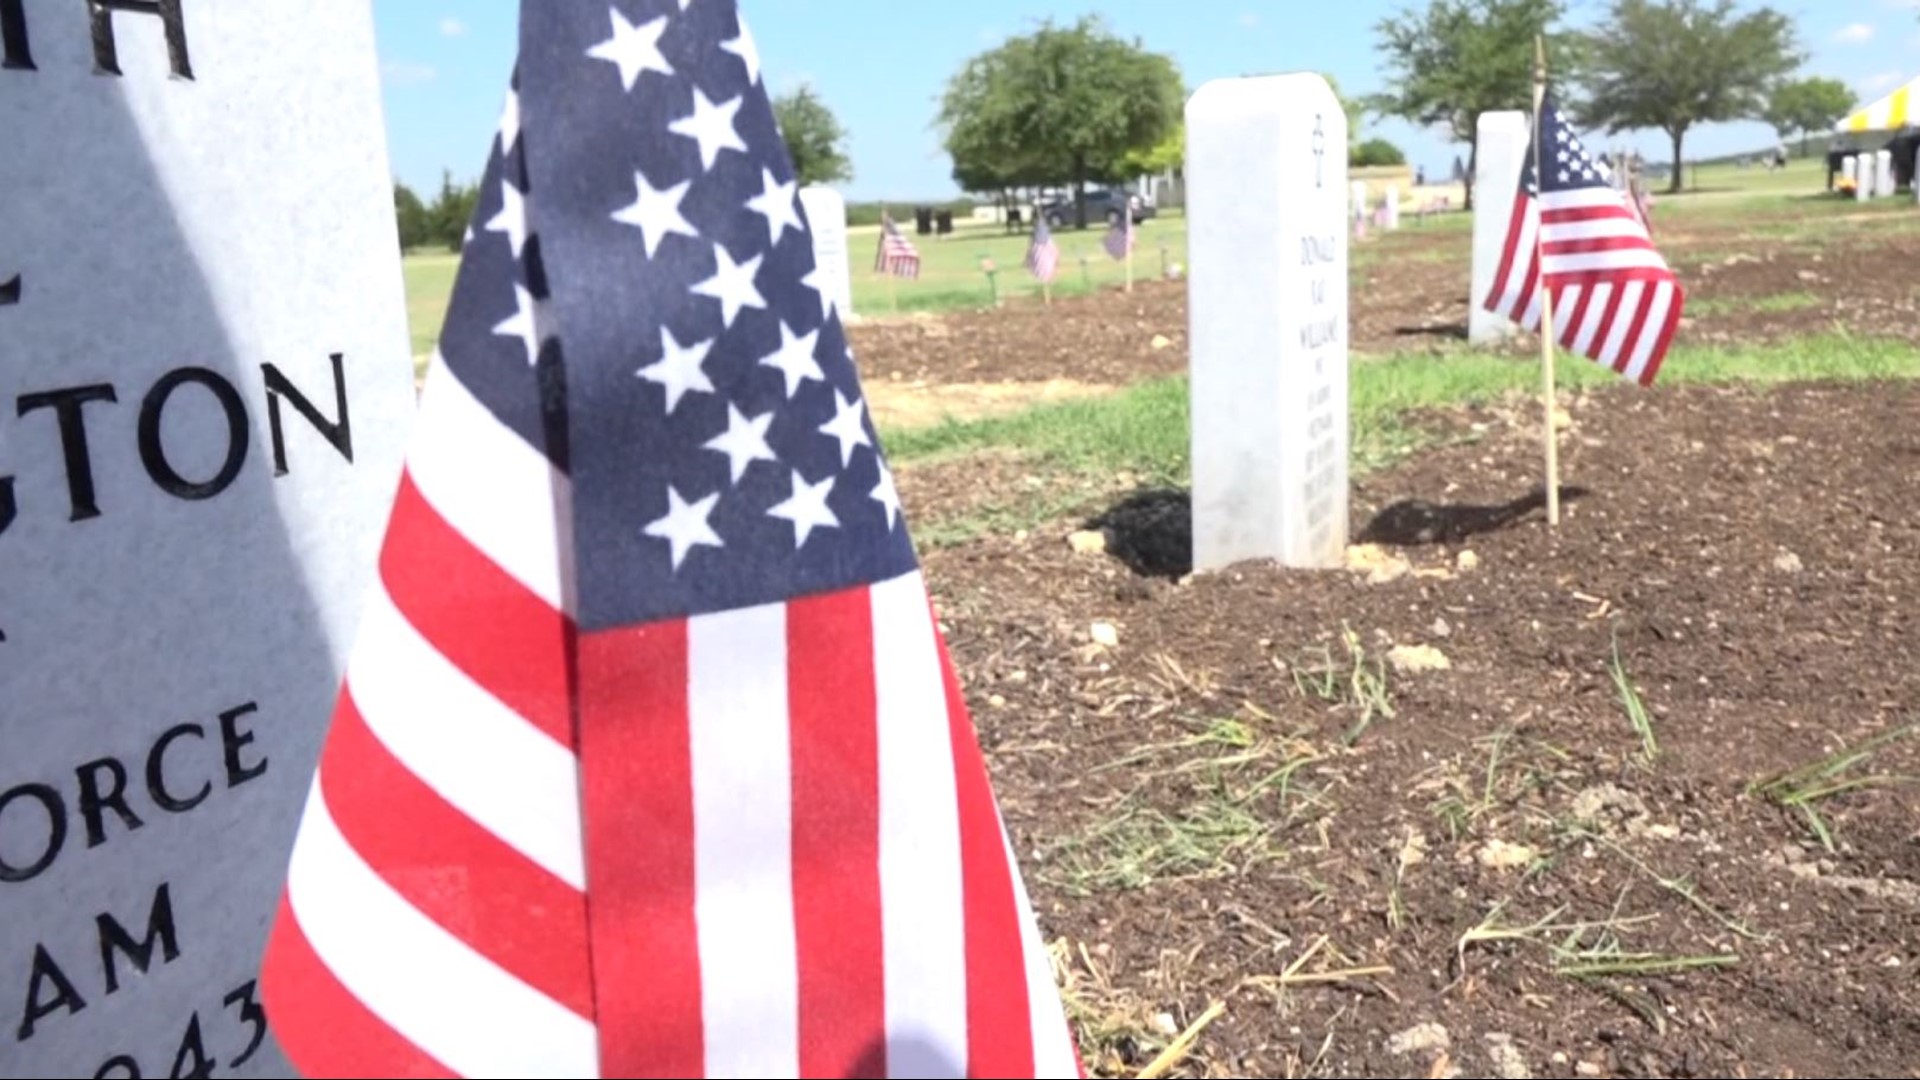 If you plan to visit a cemetery within Fort Hood's live-fire training area over Memorial Day weekend, make sure you call ahead before visiting.